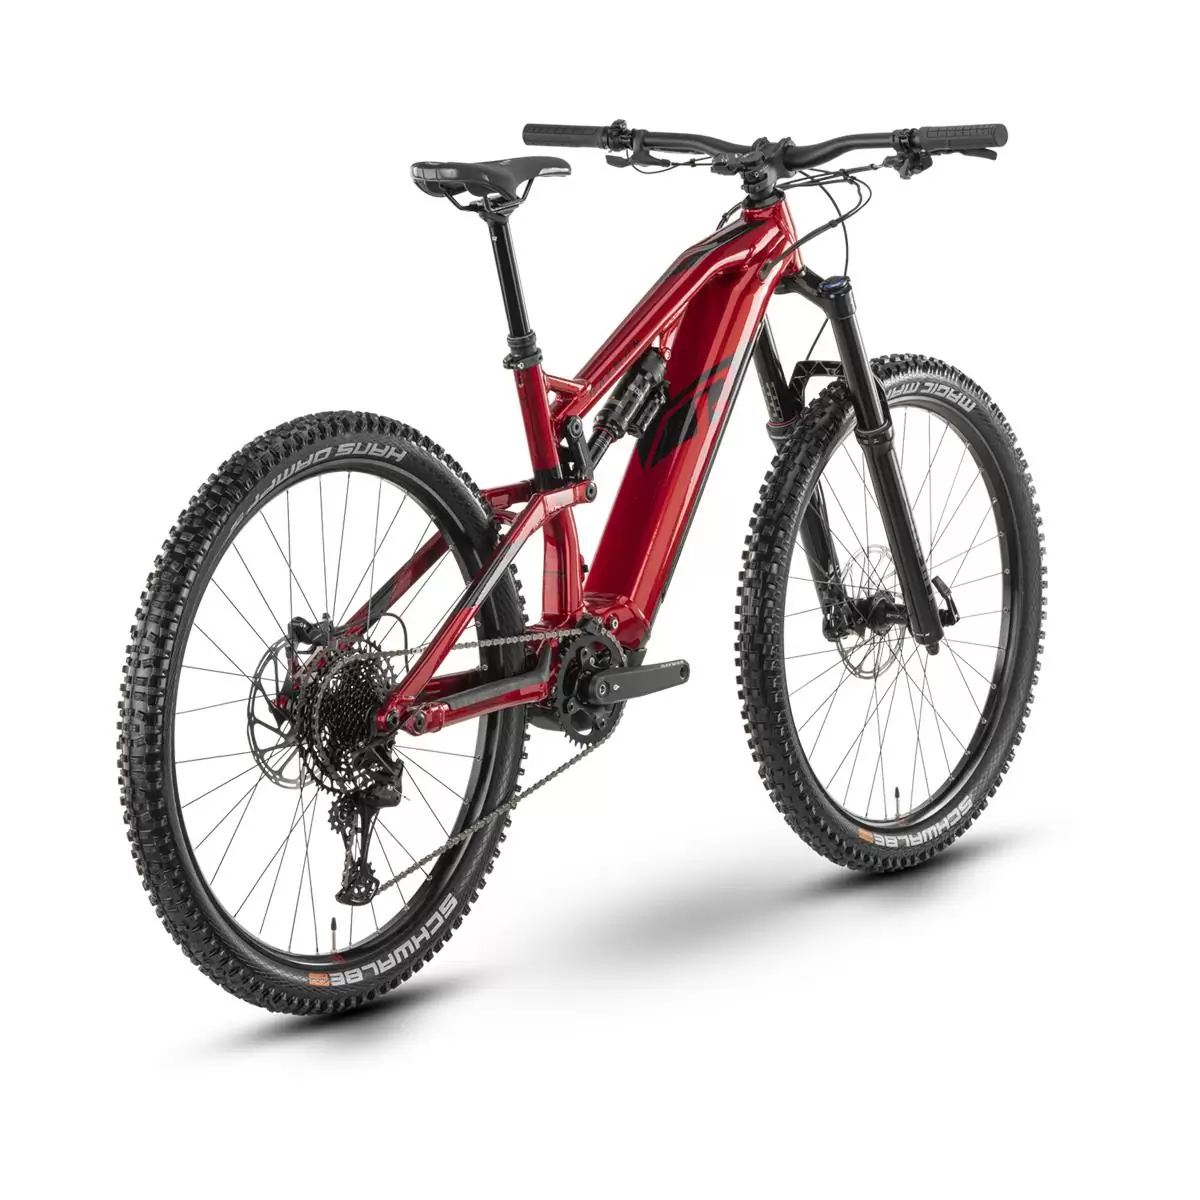 TrailRay 160E 10.0 29'' 170mm 12s 720Wh Yamaha PW-X3 Red/Black Size S #2